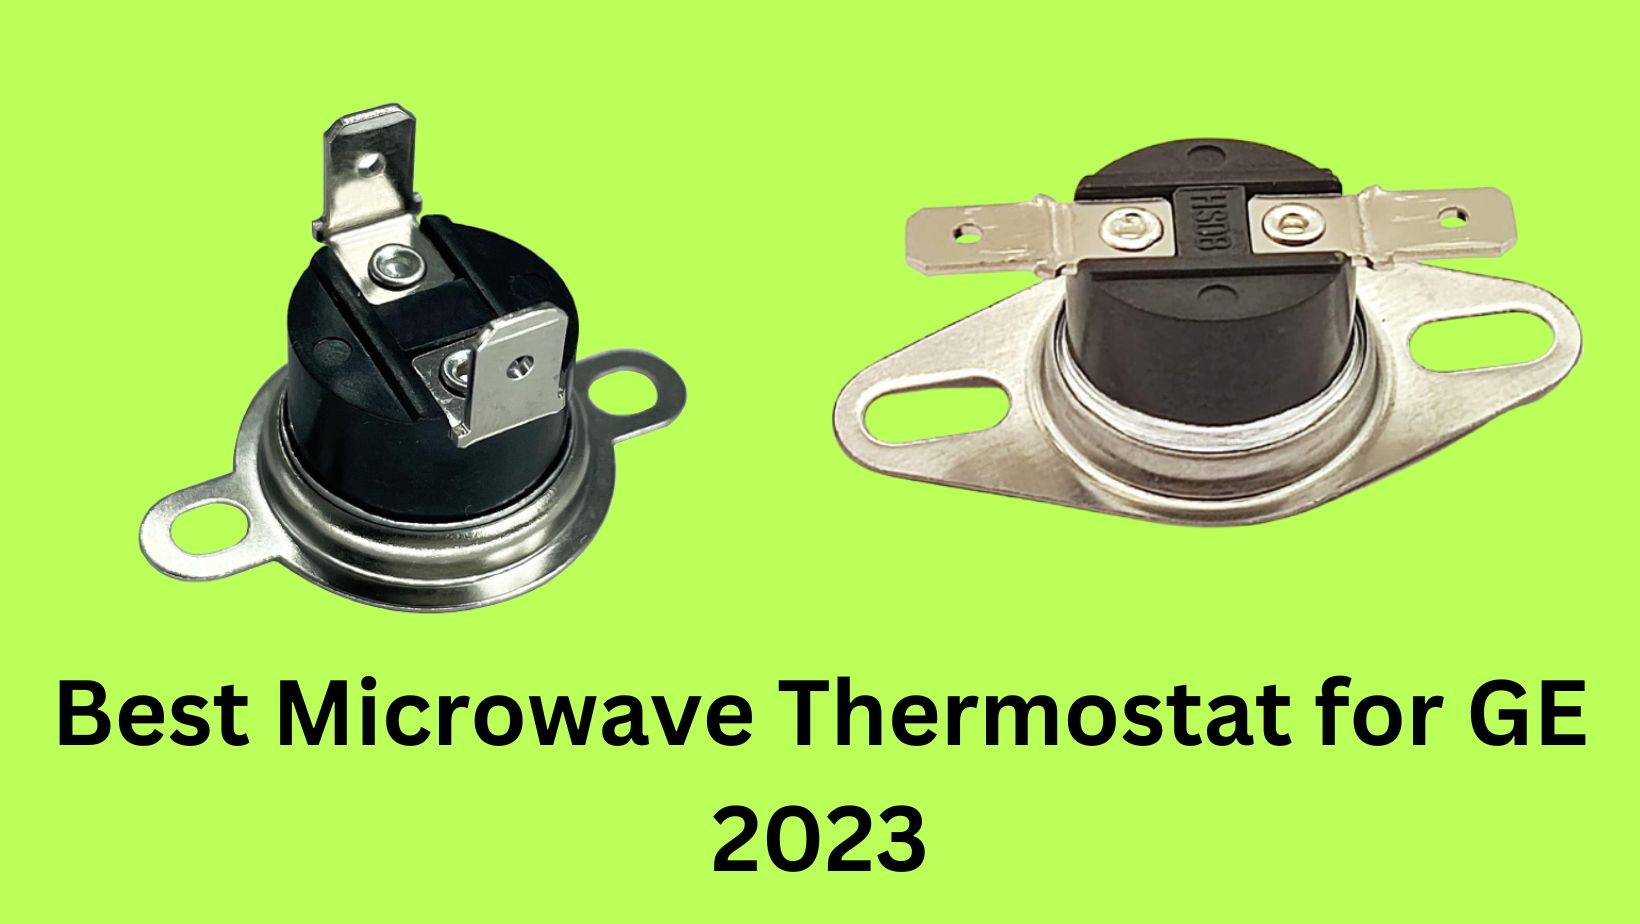 Best Microwave Thermostat for GE 2023